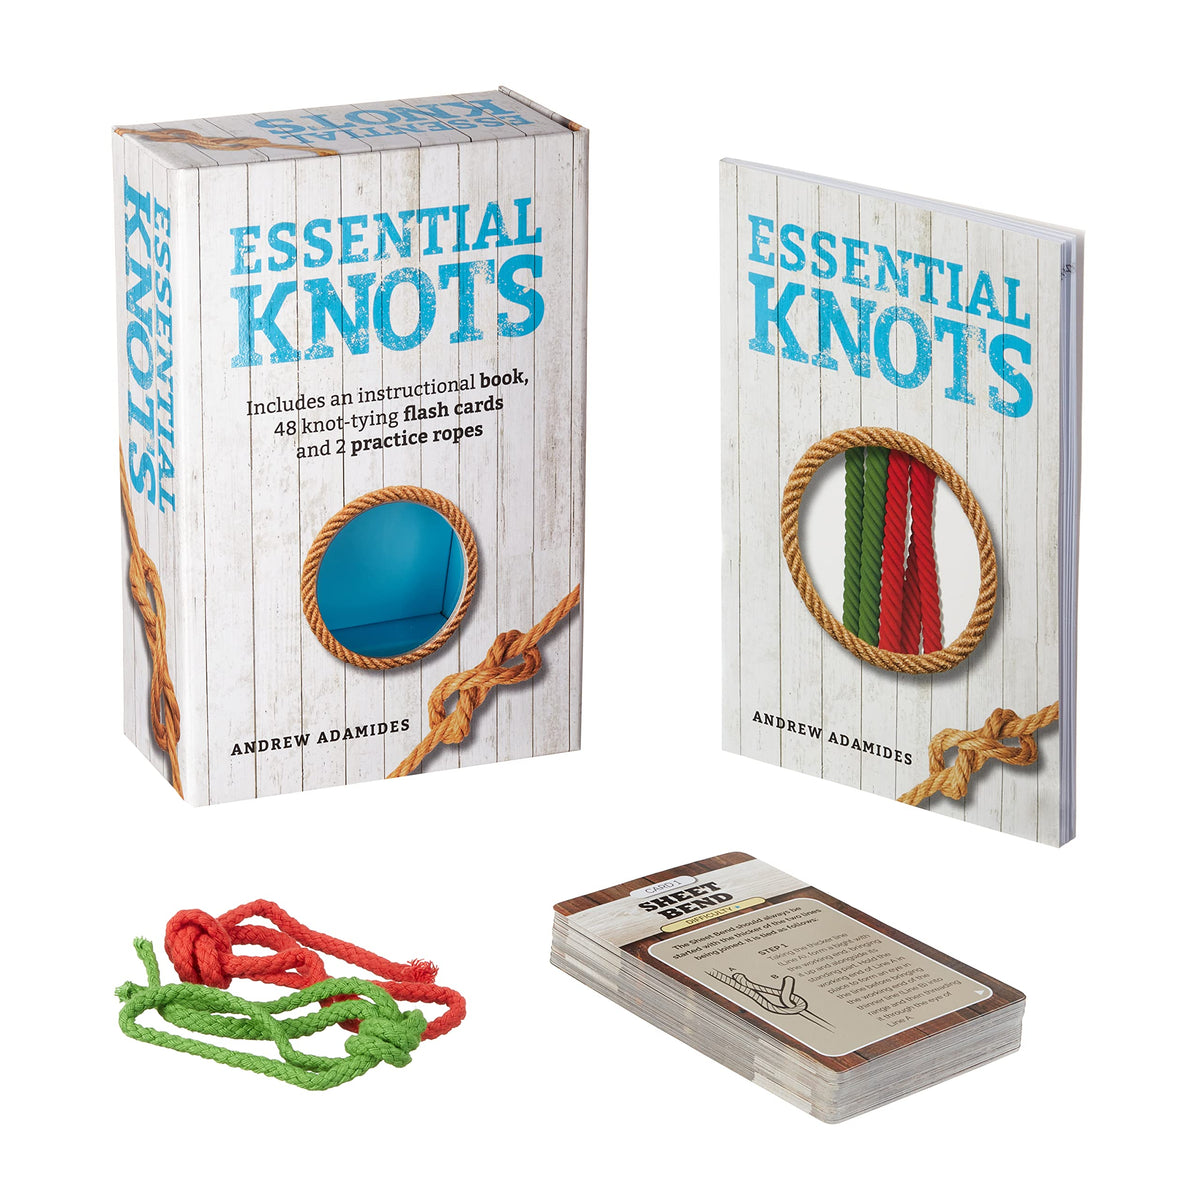 Essential Knots Kit: Includes Instructional Book, 48 Knot Tying Flash